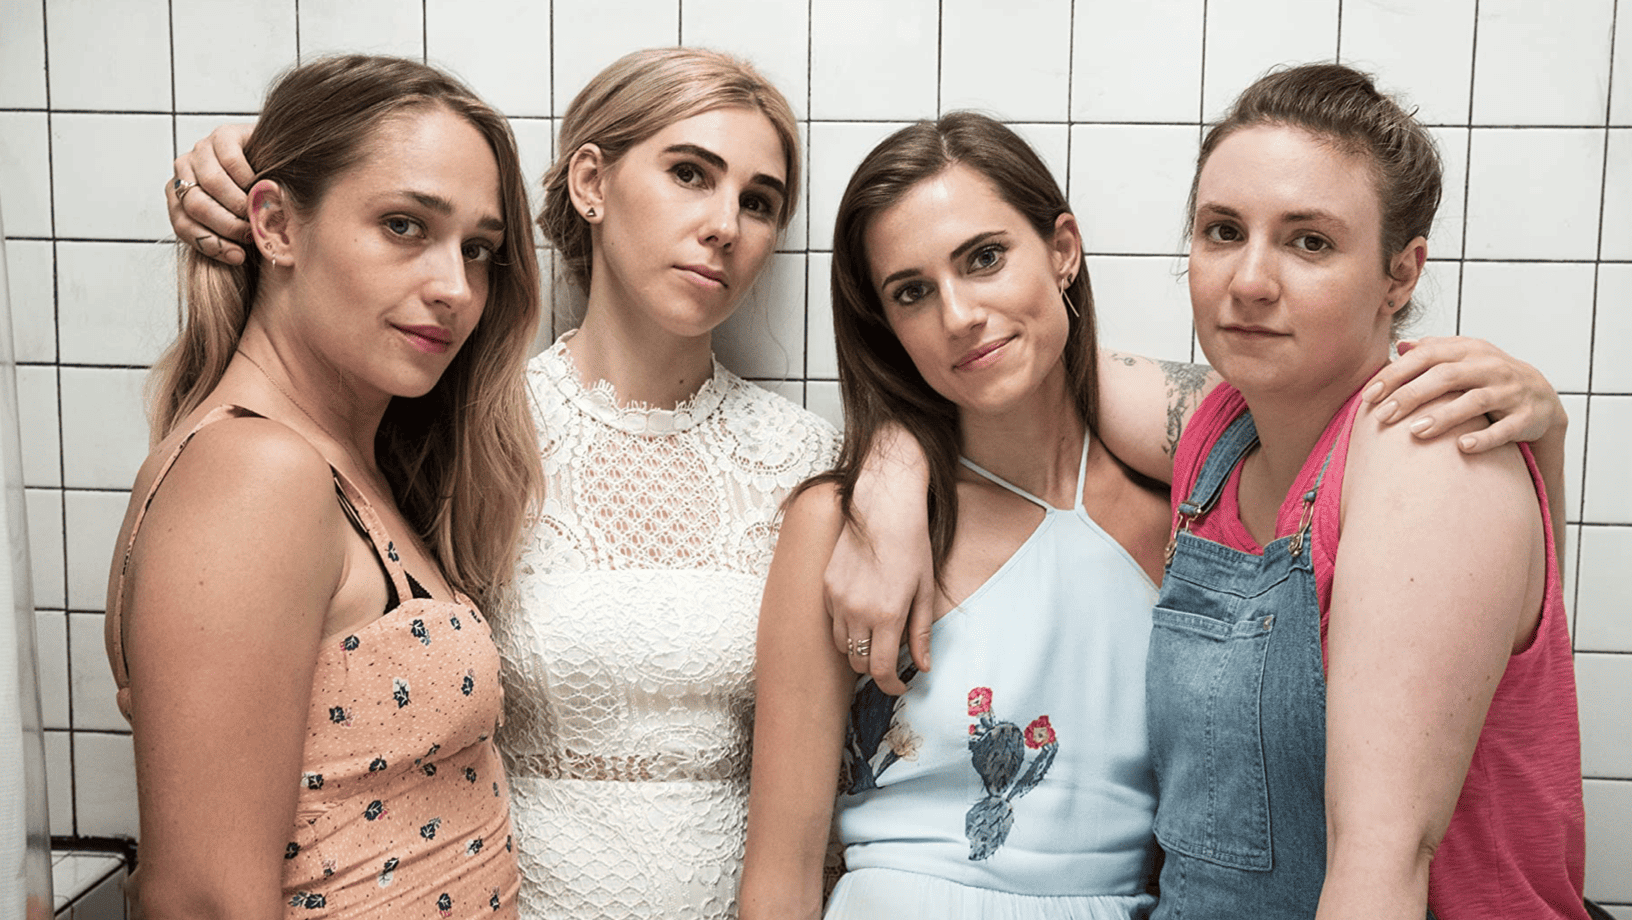 Jemima Kirke, Zosia Mamet, Allison Williams, and Lena Dunham in this image from Apatow Productions